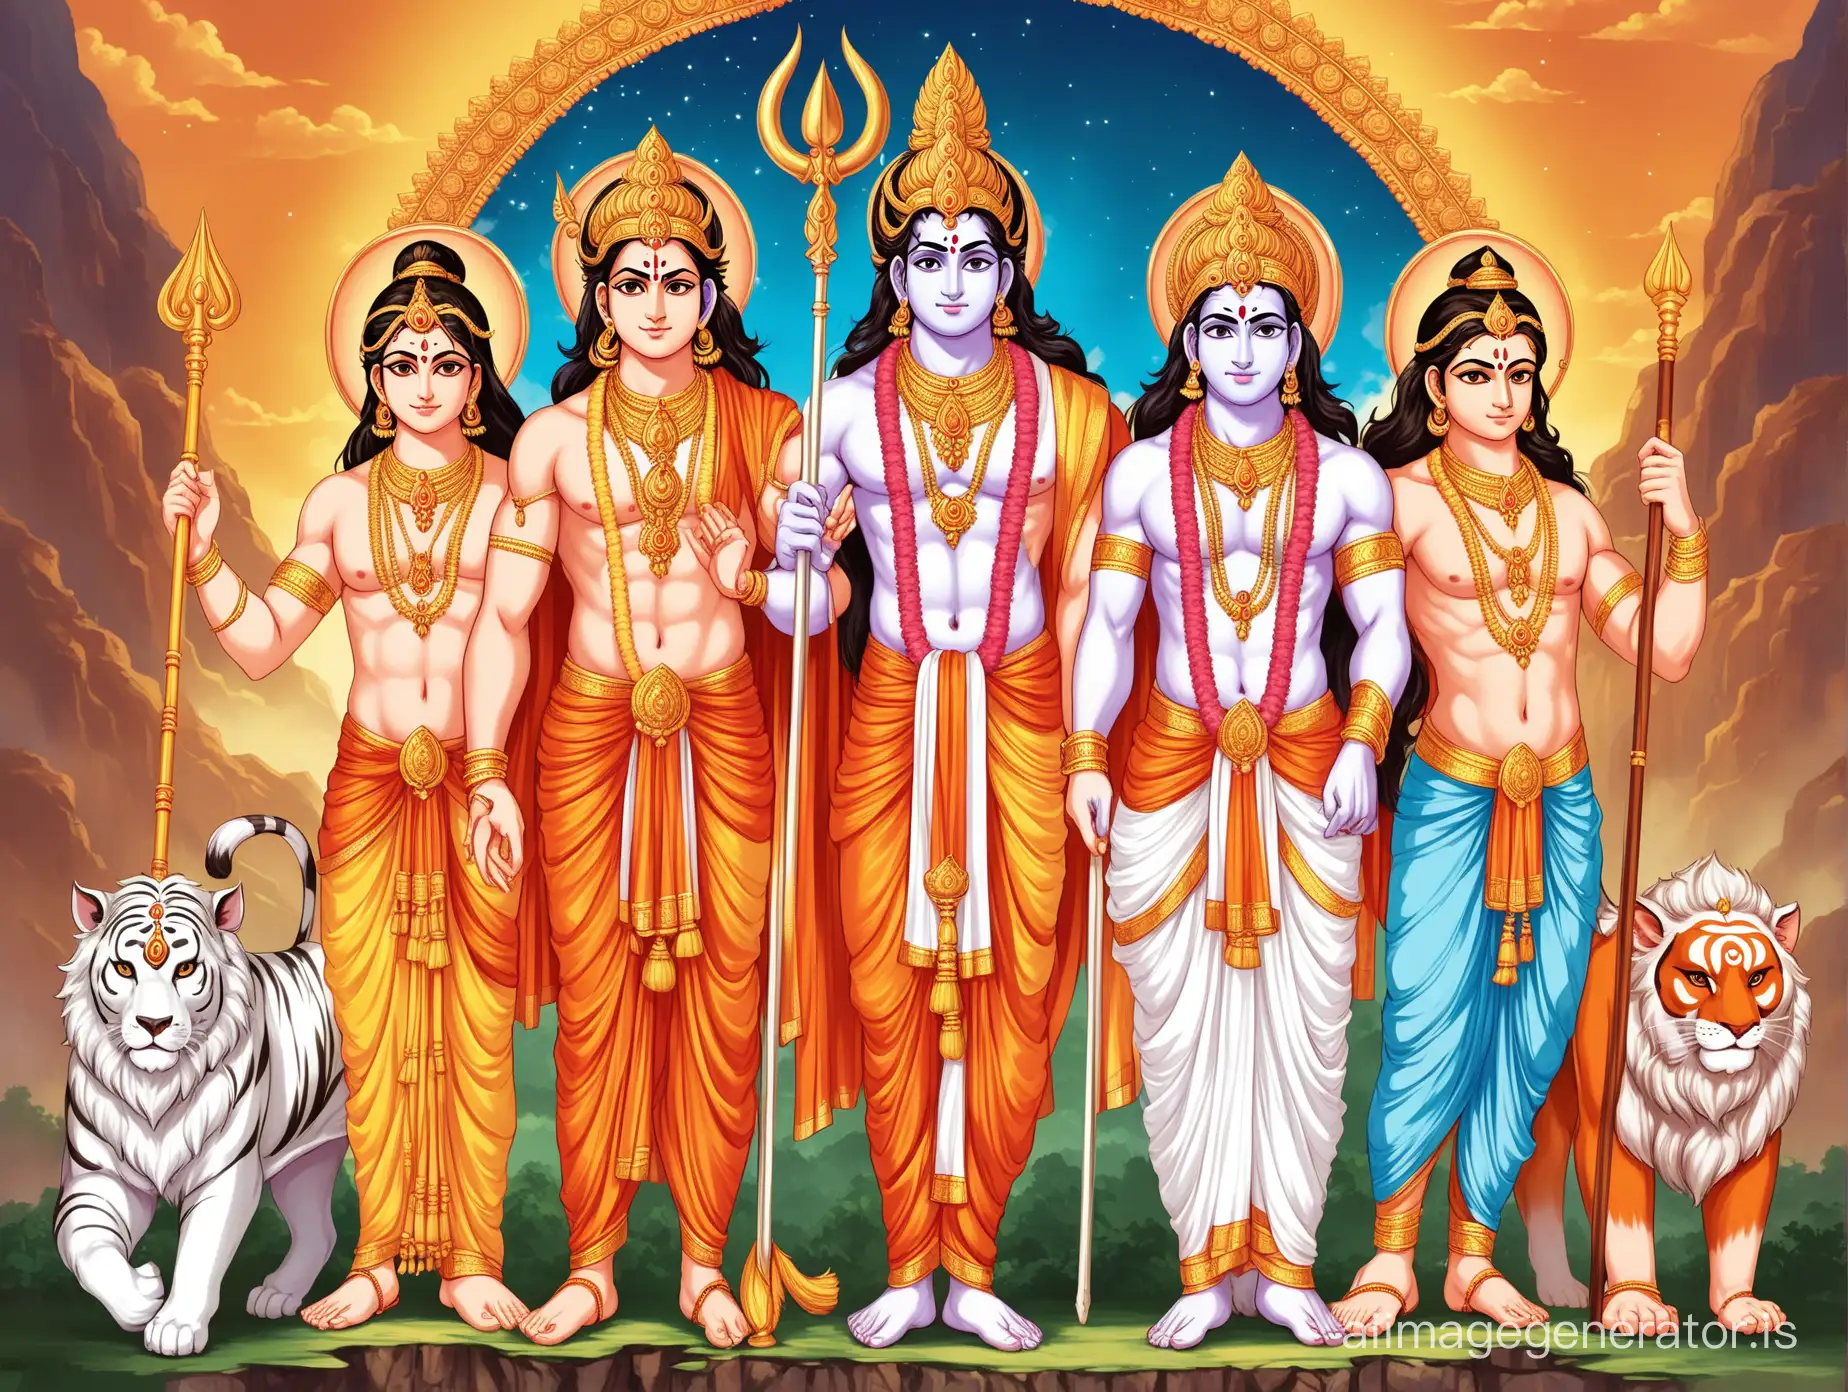 Create an image showcasing the divine unity of Lord Ram, Sita, Lakshmana, and Hanuman, symbolizing loyalty, devotion, and unwavering righteousness.